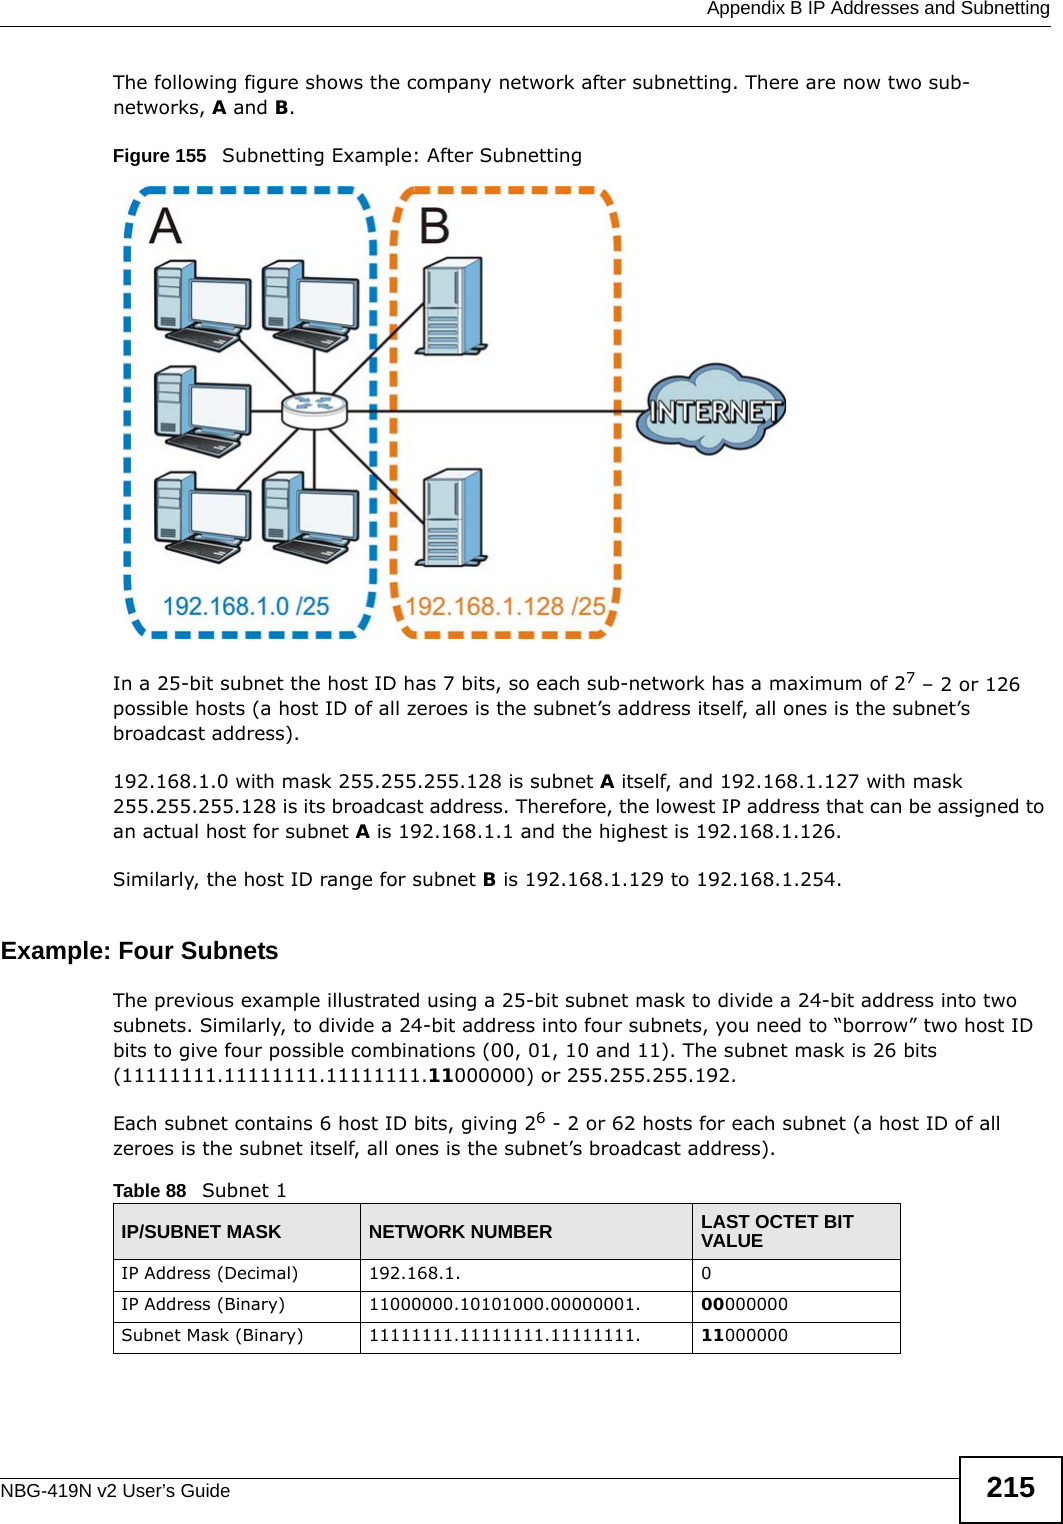  Appendix B IP Addresses and SubnettingNBG-419N v2 User’s Guide 215The following figure shows the company network after subnetting. There are now two sub-networks, A and B. Figure 155   Subnetting Example: After SubnettingIn a 25-bit subnet the host ID has 7 bits, so each sub-network has a maximum of 27 – 2 or 126 possible hosts (a host ID of all zeroes is the subnet’s address itself, all ones is the subnet’s broadcast address).192.168.1.0 with mask 255.255.255.128 is subnet A itself, and 192.168.1.127 with mask 255.255.255.128 is its broadcast address. Therefore, the lowest IP address that can be assigned to an actual host for subnet A is 192.168.1.1 and the highest is 192.168.1.126. Similarly, the host ID range for subnet B is 192.168.1.129 to 192.168.1.254.Example: Four Subnets The previous example illustrated using a 25-bit subnet mask to divide a 24-bit address into two subnets. Similarly, to divide a 24-bit address into four subnets, you need to “borrow” two host ID bits to give four possible combinations (00, 01, 10 and 11). The subnet mask is 26 bits (11111111.11111111.11111111.11000000) or 255.255.255.192. Each subnet contains 6 host ID bits, giving 26 - 2 or 62 hosts for each subnet (a host ID of all zeroes is the subnet itself, all ones is the subnet’s broadcast address). Table 88   Subnet 1IP/SUBNET MASK NETWORK NUMBER LAST OCTET BIT VALUEIP Address (Decimal) 192.168.1. 0IP Address (Binary) 11000000.10101000.00000001. 00000000Subnet Mask (Binary) 11111111.11111111.11111111. 11000000